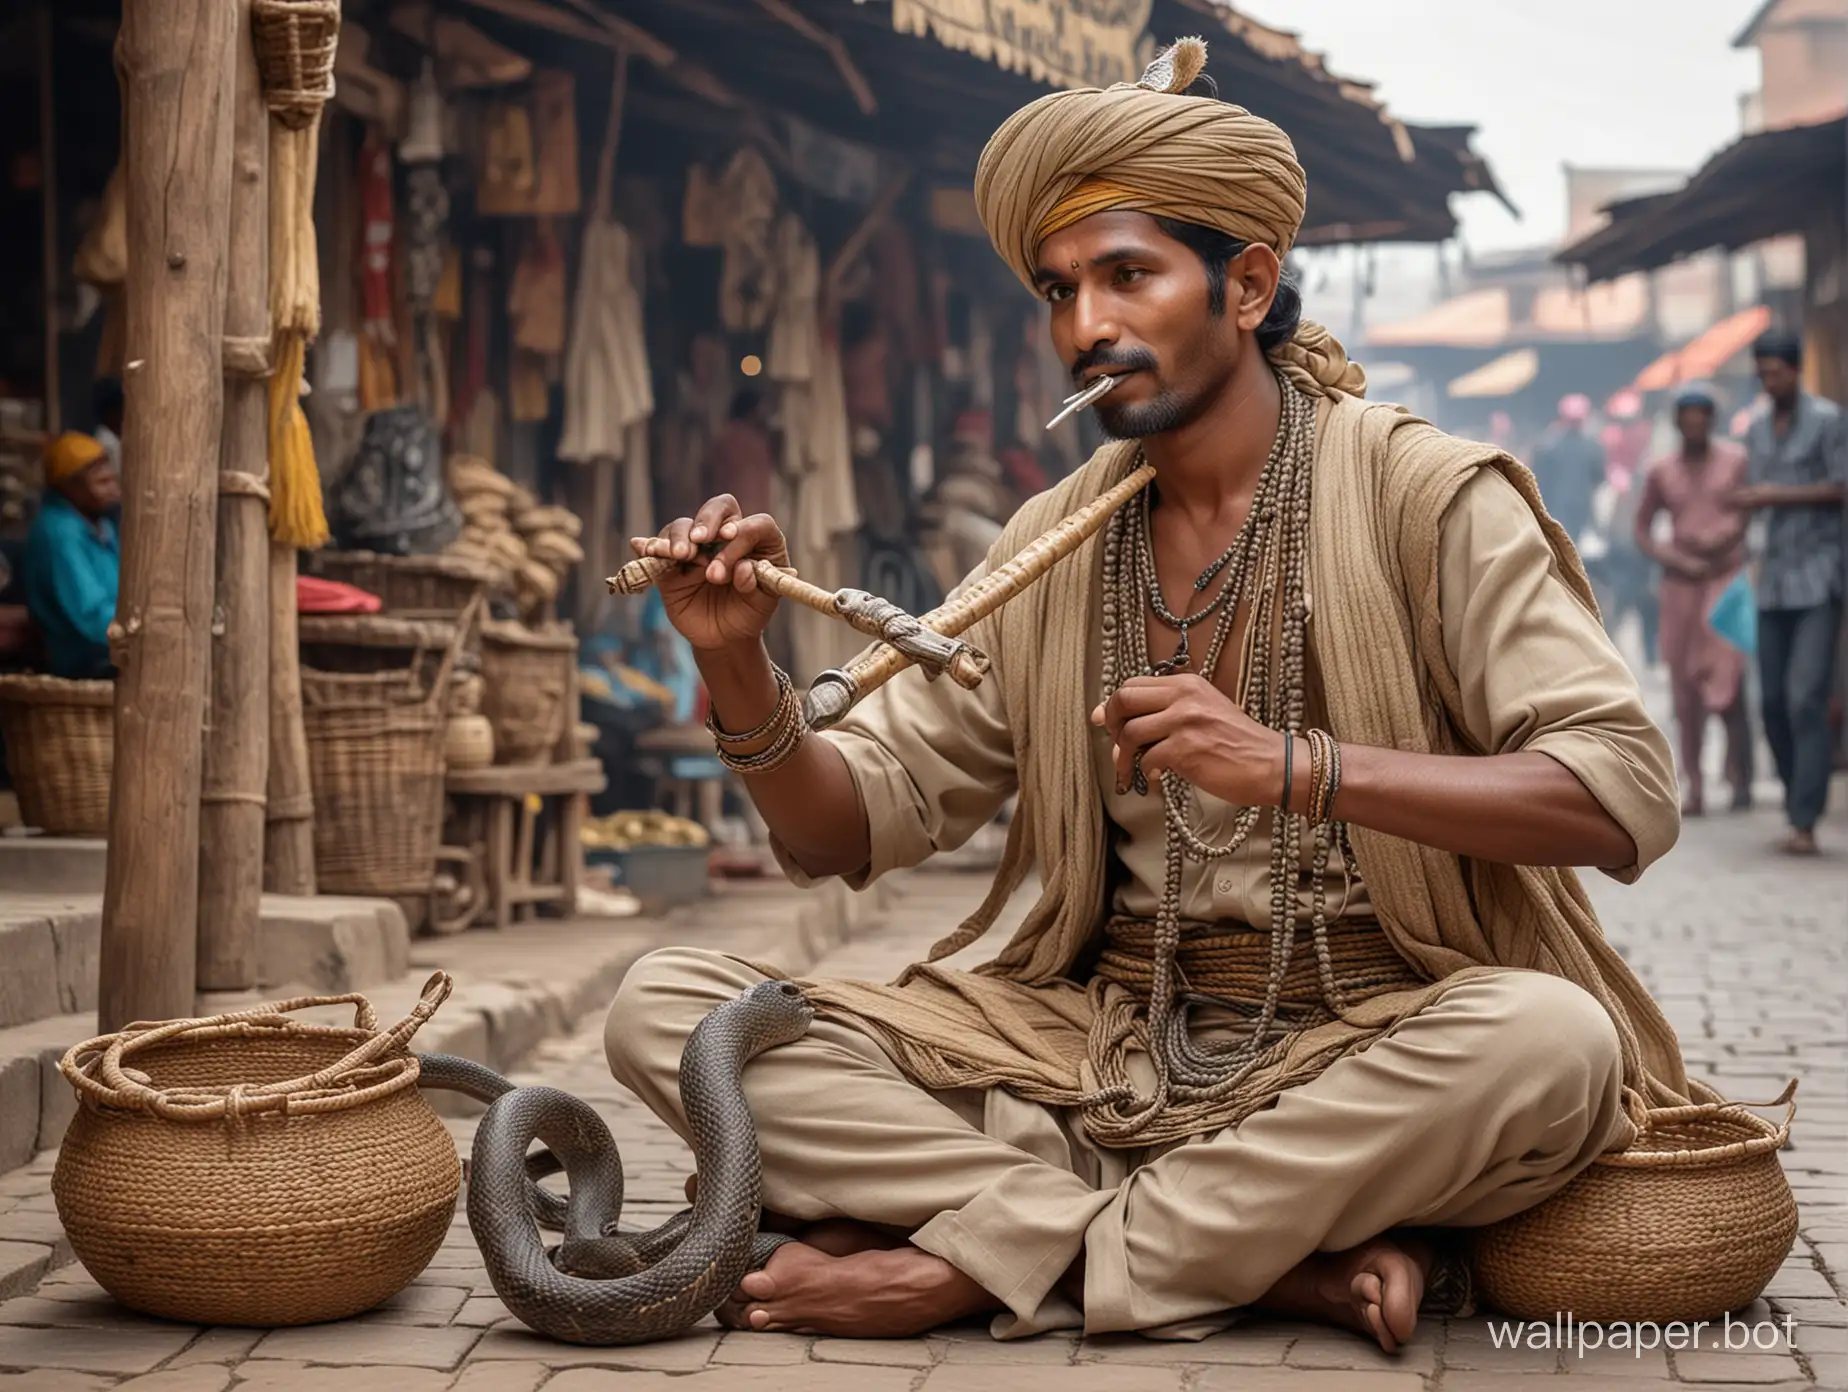 Seated Indian snake charmer in a busy market place playing flute to cobra in a woven basket. full body view. Detailed features, sharp image.